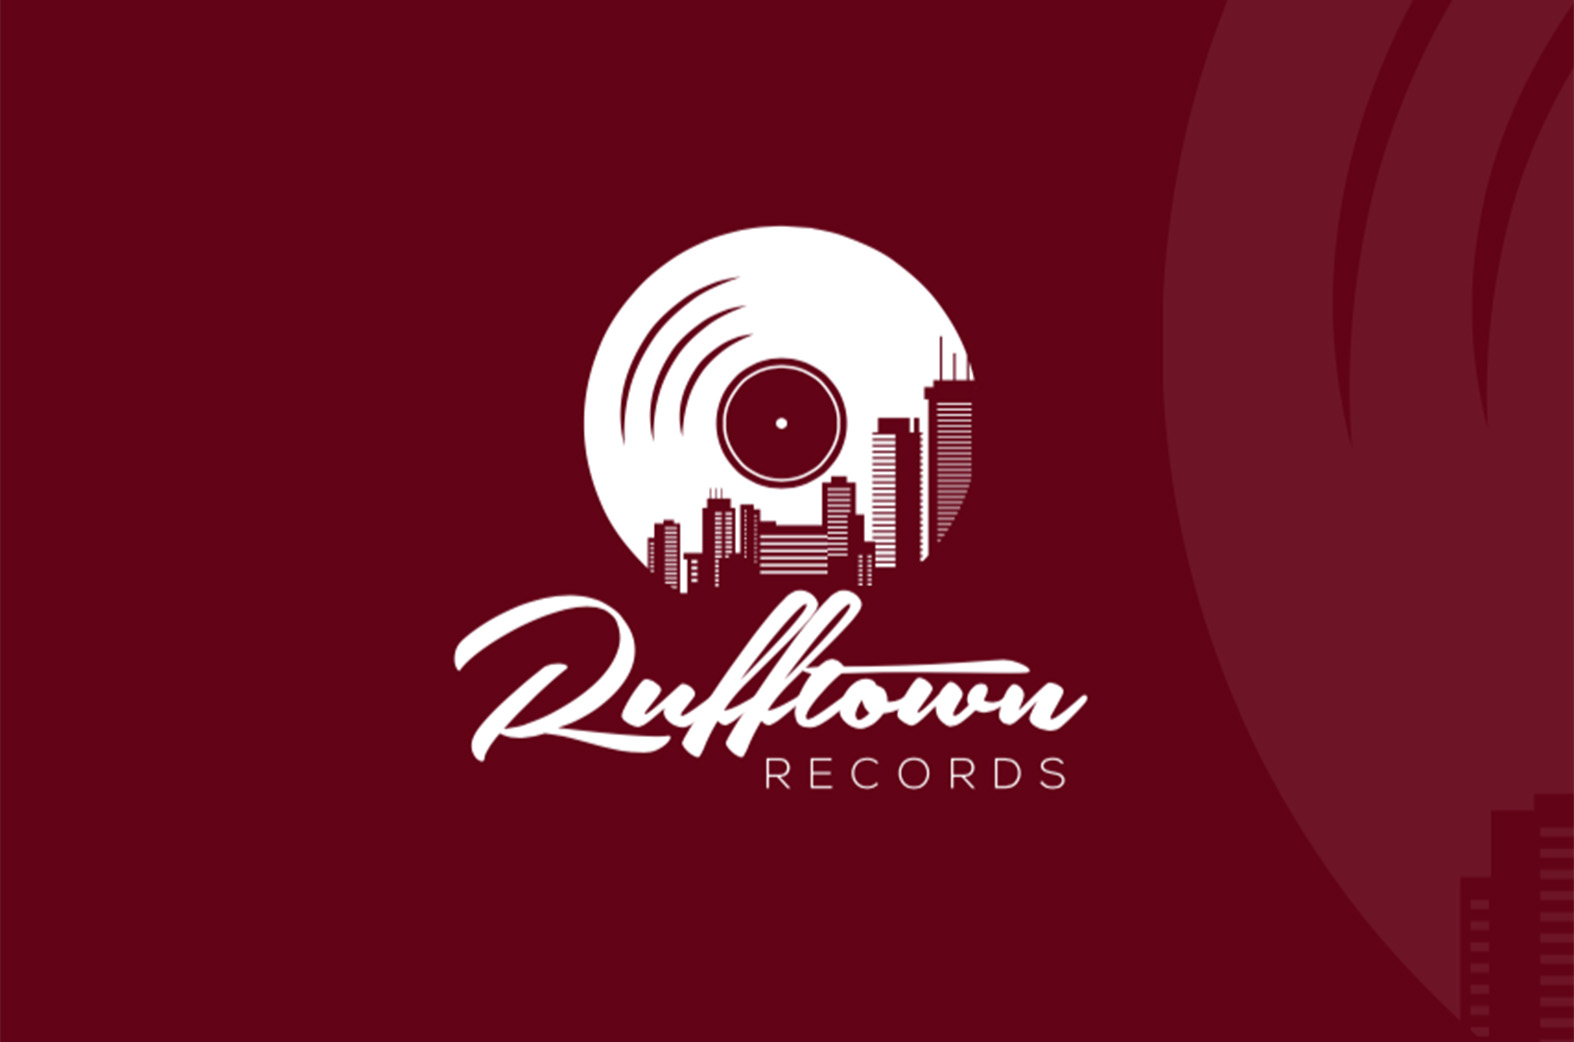 Press Release: RuffTown Records will not released new Ebony songs